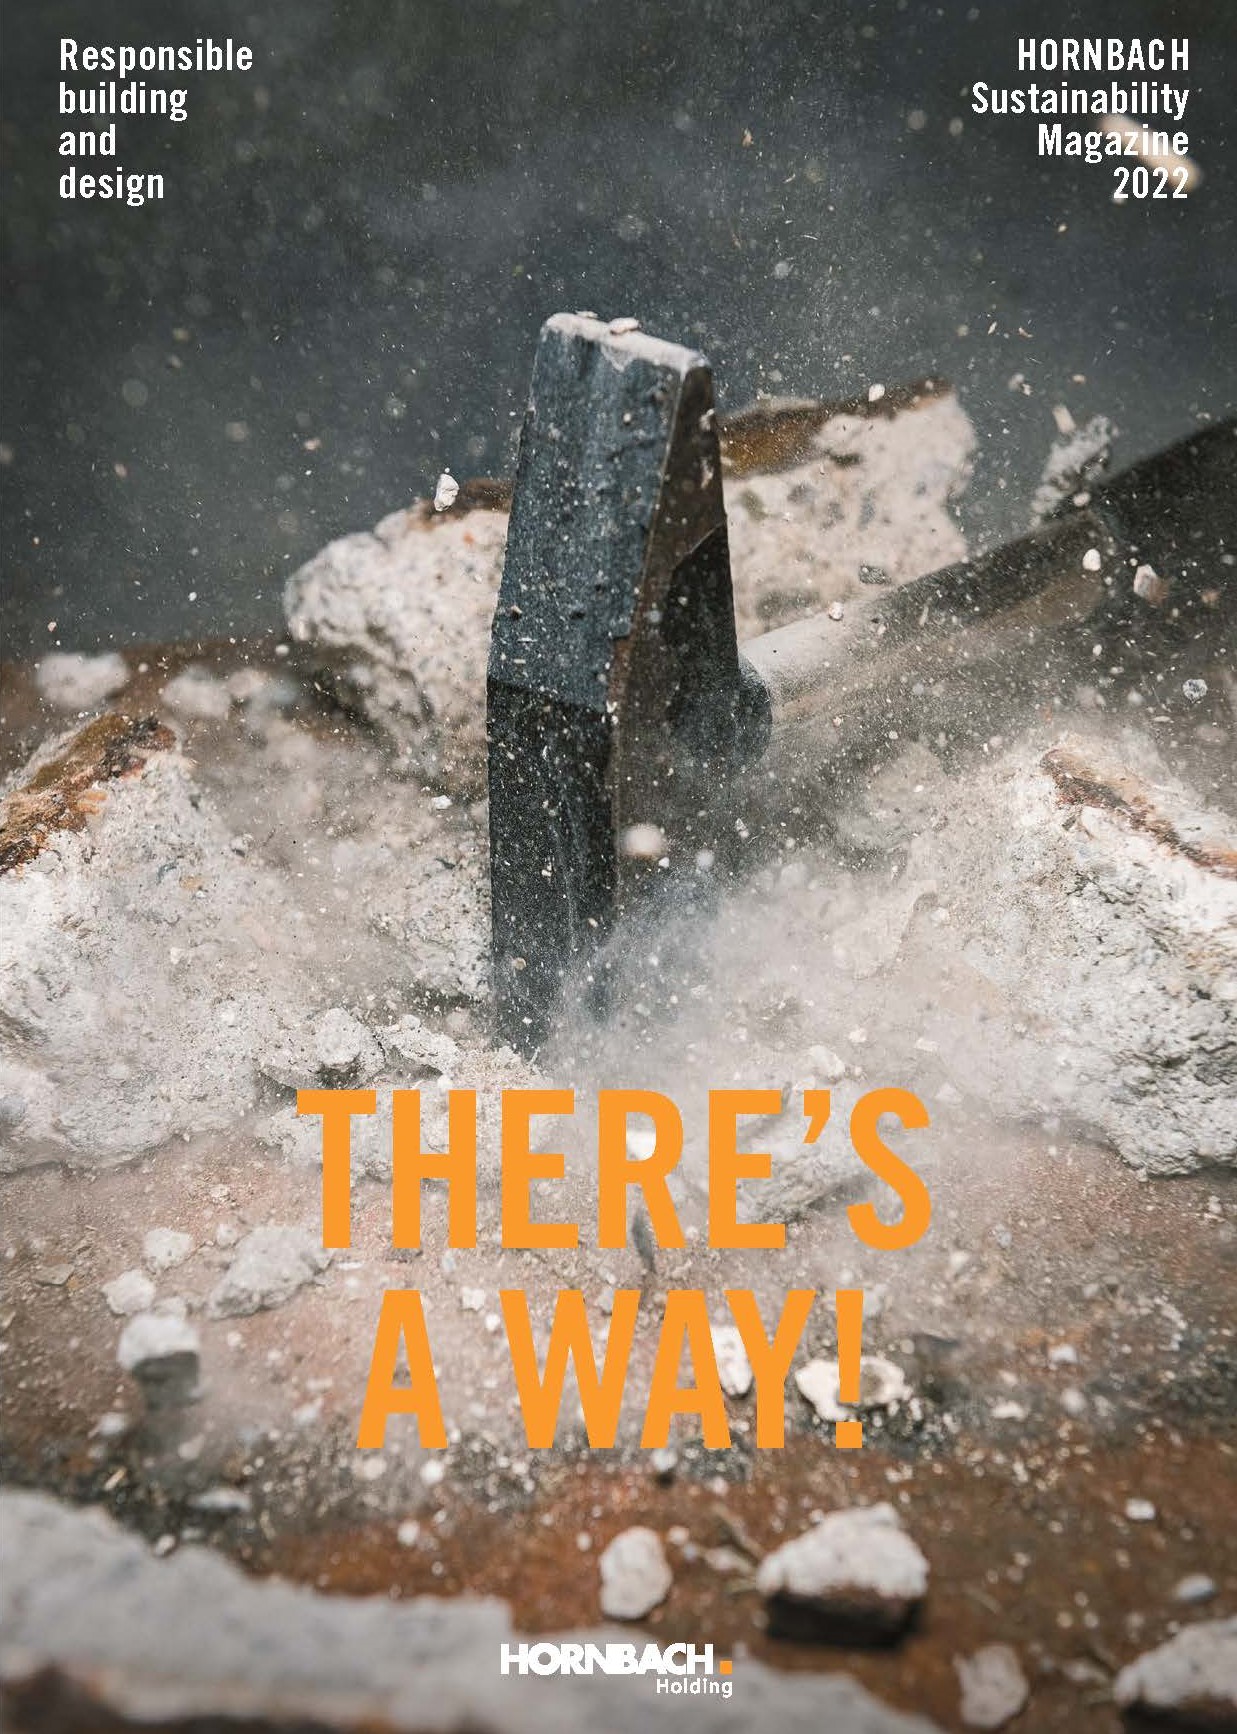 HORNBACH Sustainability Magazine - There's a way!